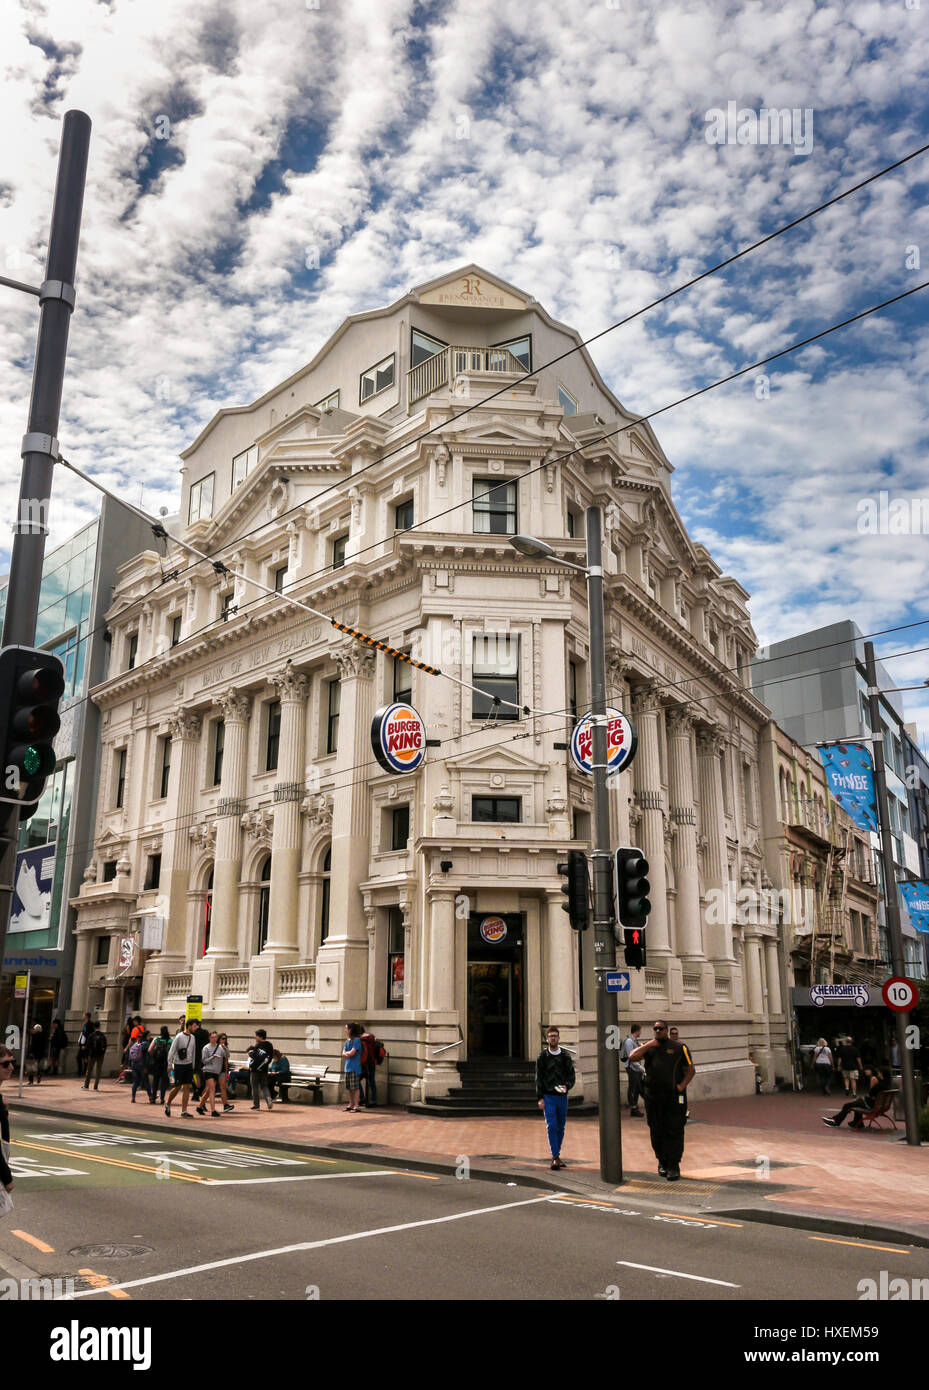 Burger King, Cuba Street, which is situated in an old heritage building, originally a bank. Stock Photo